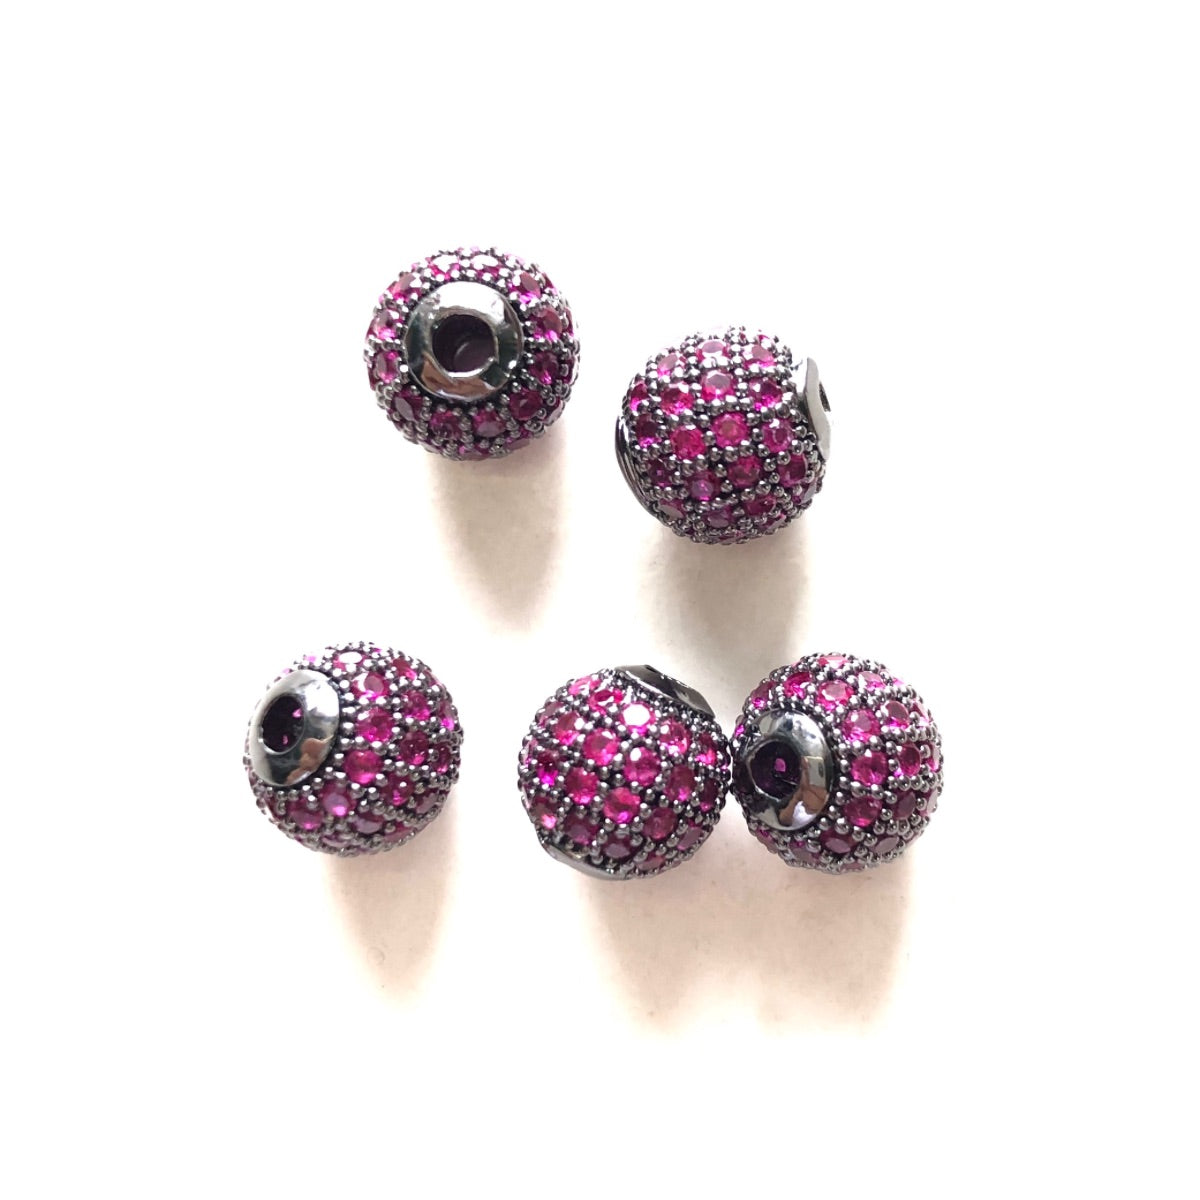 10pcs/lot 6mm, 8mm Colorful CZ Paved Ball Spacers Black Fuchsia CZ Paved Spacers 6mm Beads 8mm Beads Ball Beads Colorful Zirconia New Spacers Arrivals Charms Beads Beyond